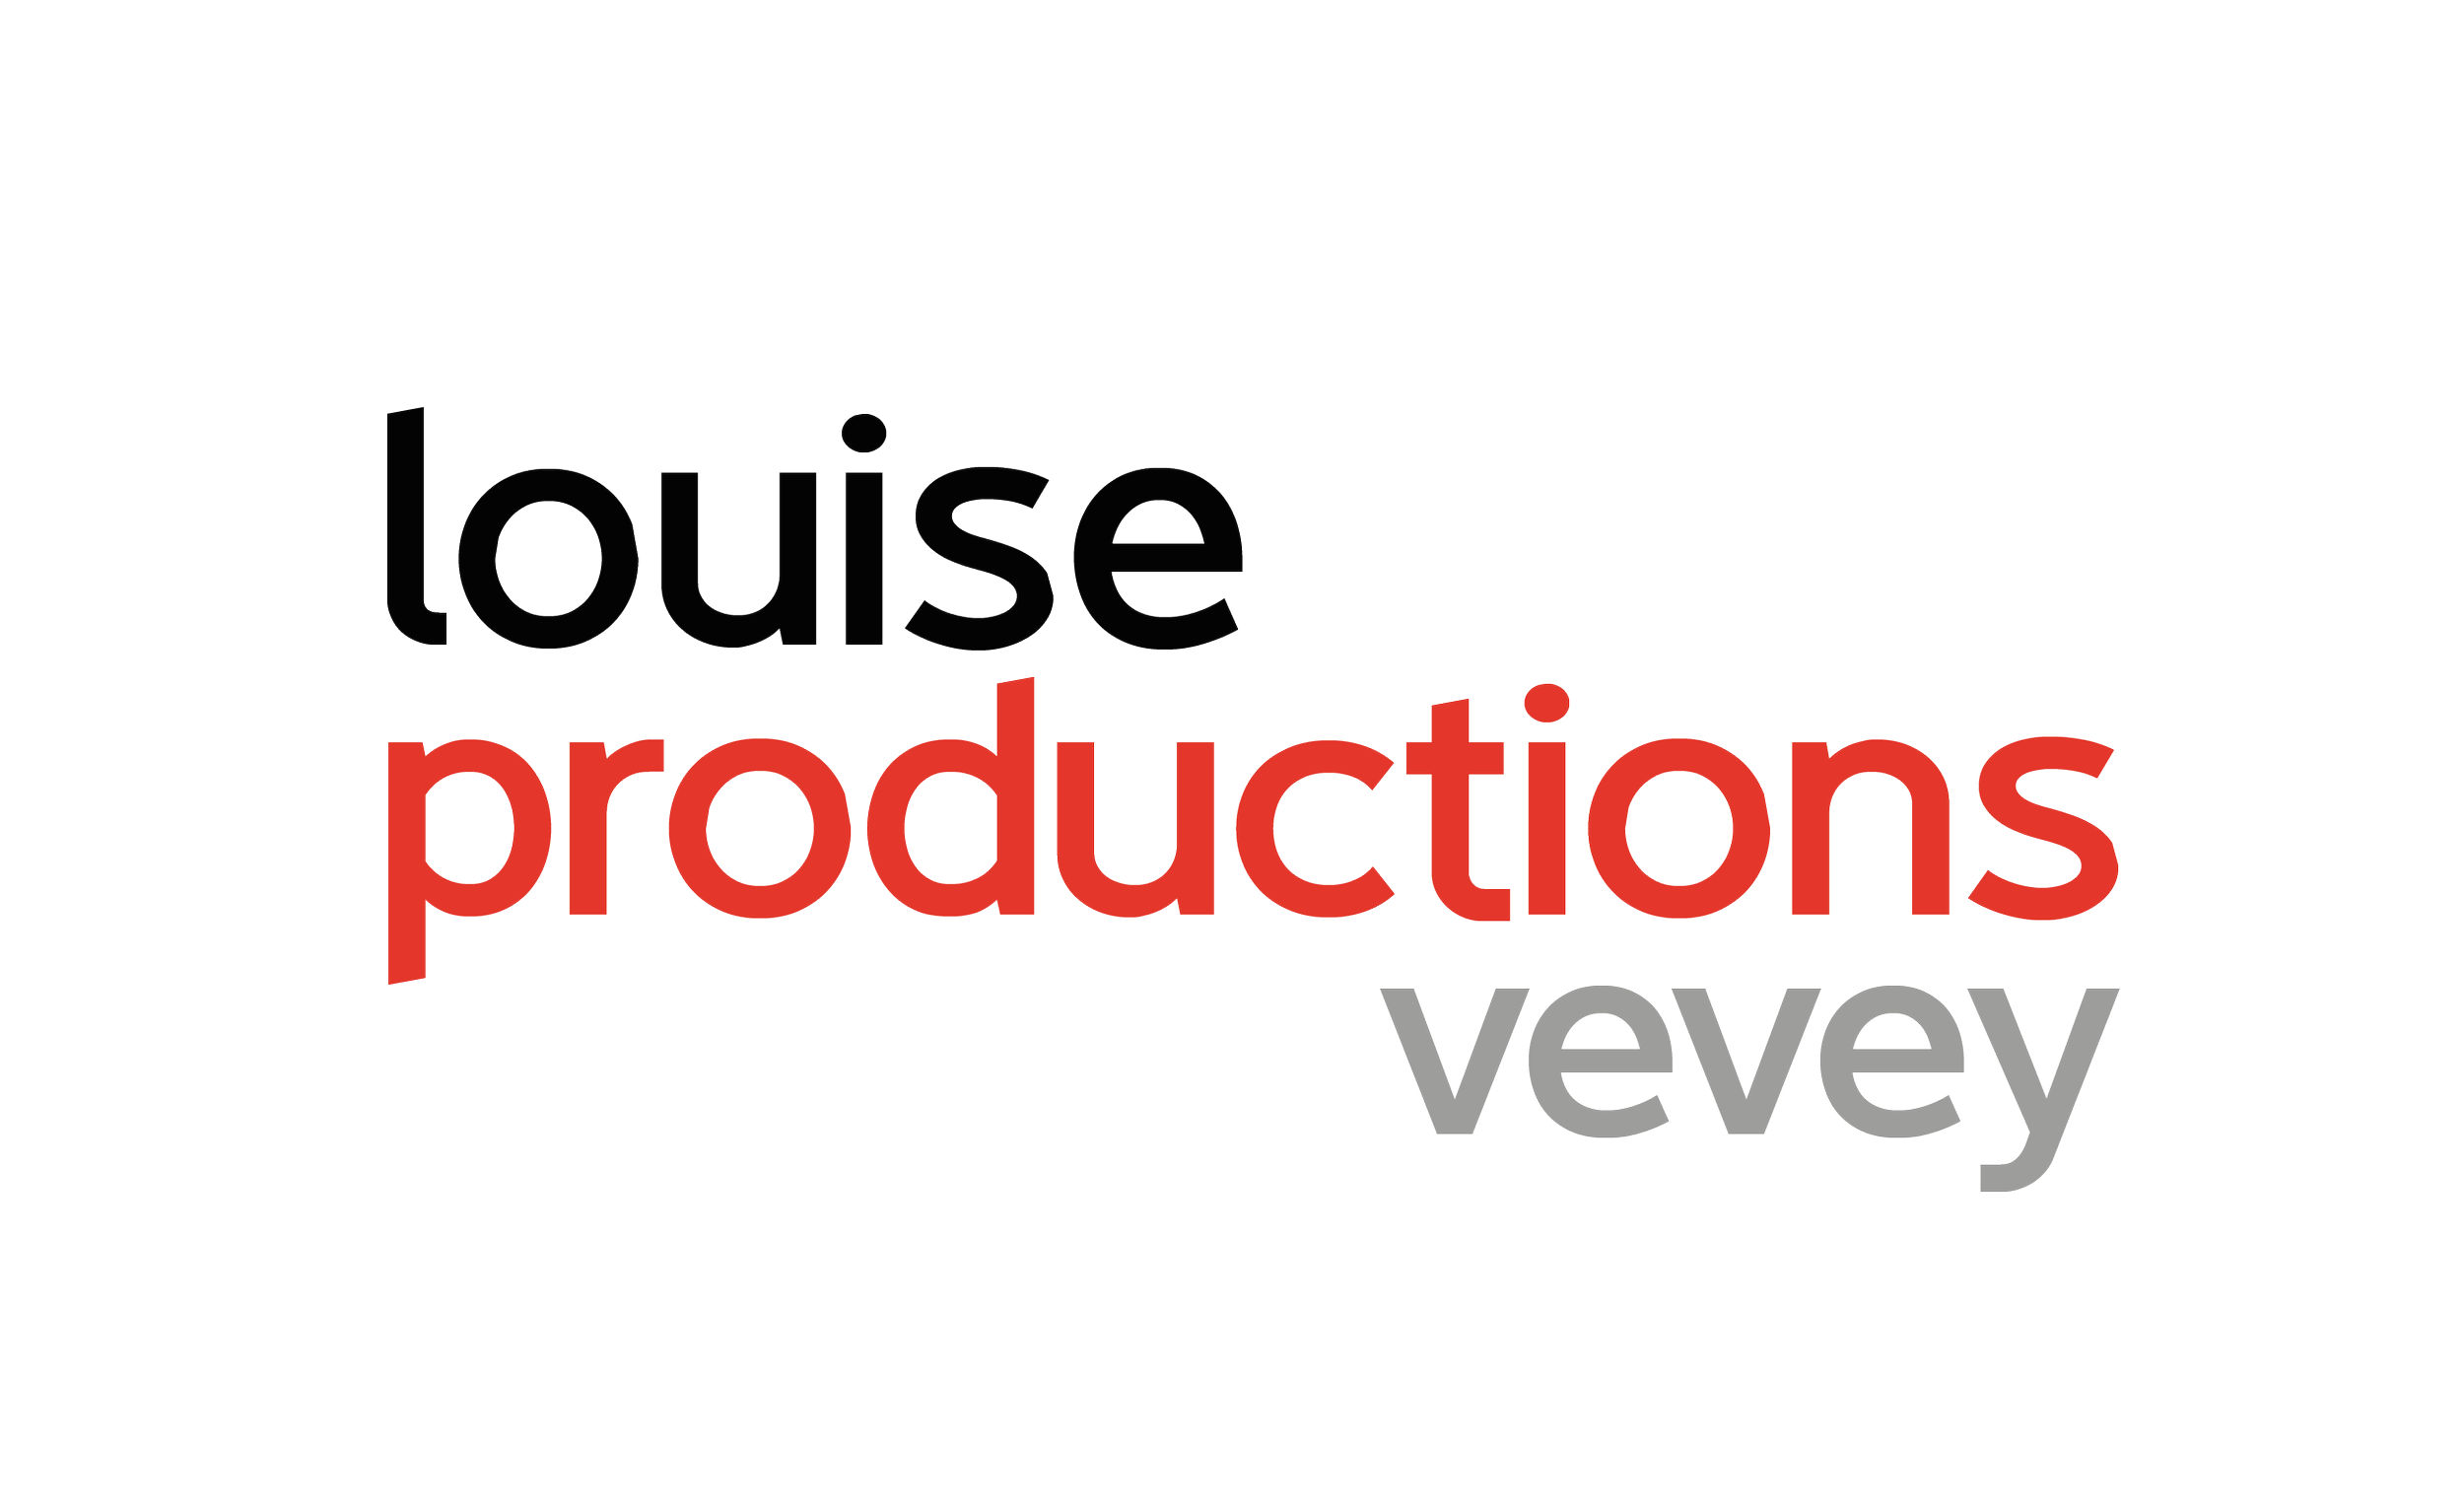 Louise Productions Vevey